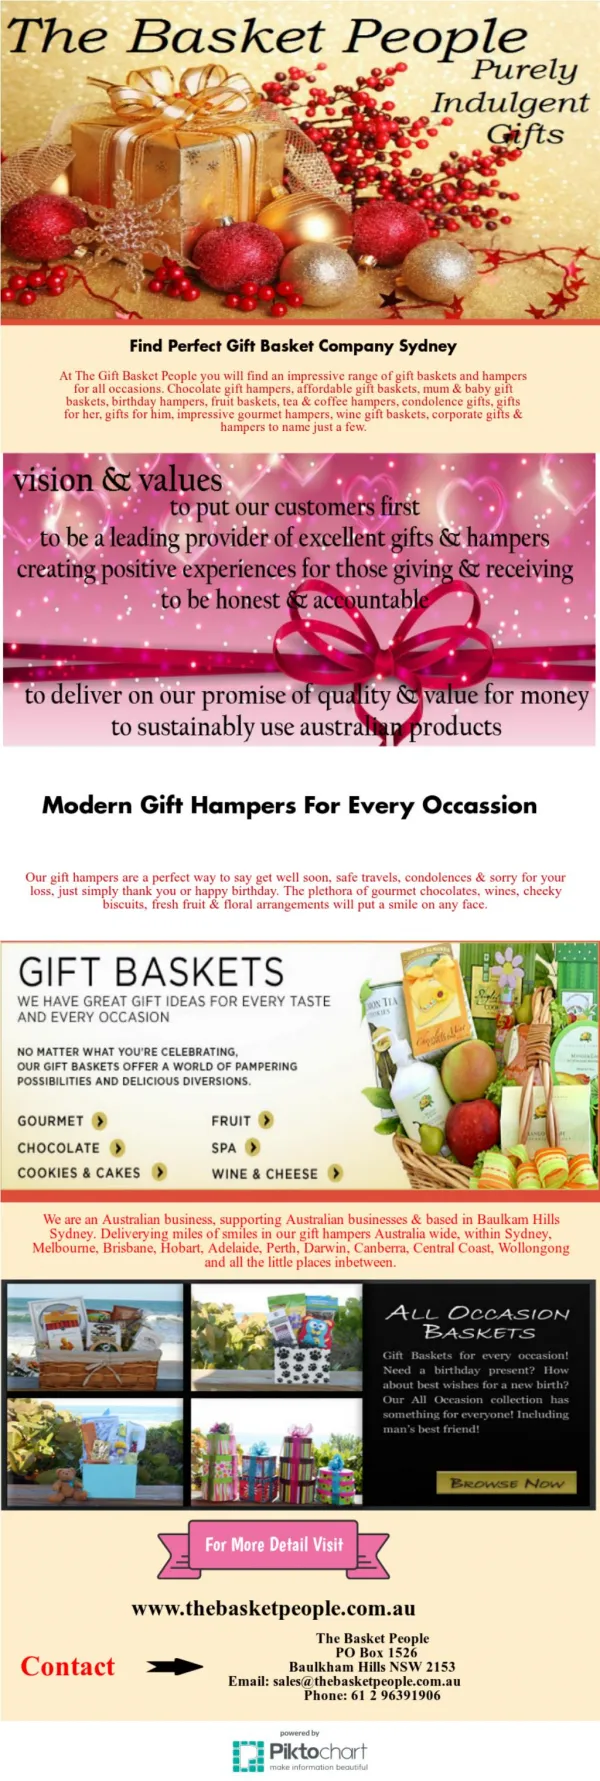 Select One of Our Superior Quality Gift Baskets Online Australia